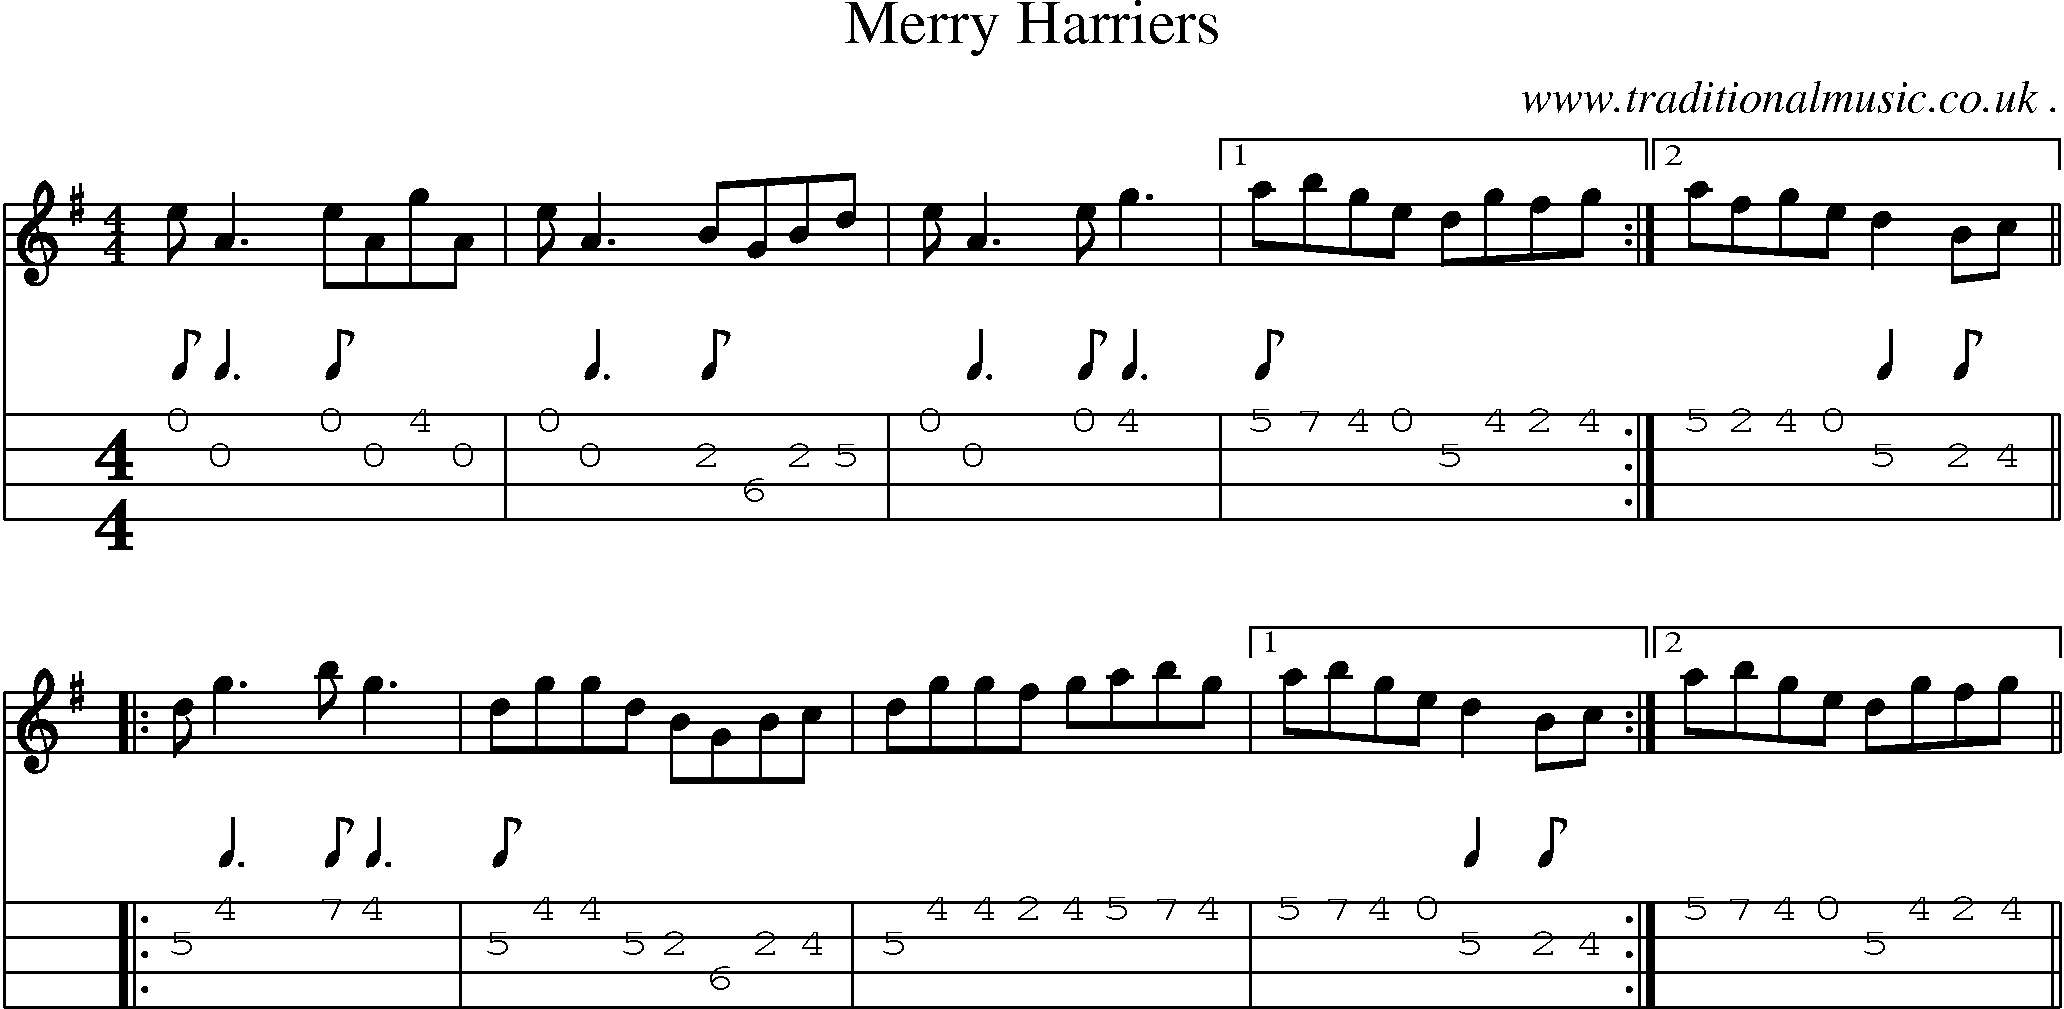 Sheet-Music and Mandolin Tabs for Merry Harriers